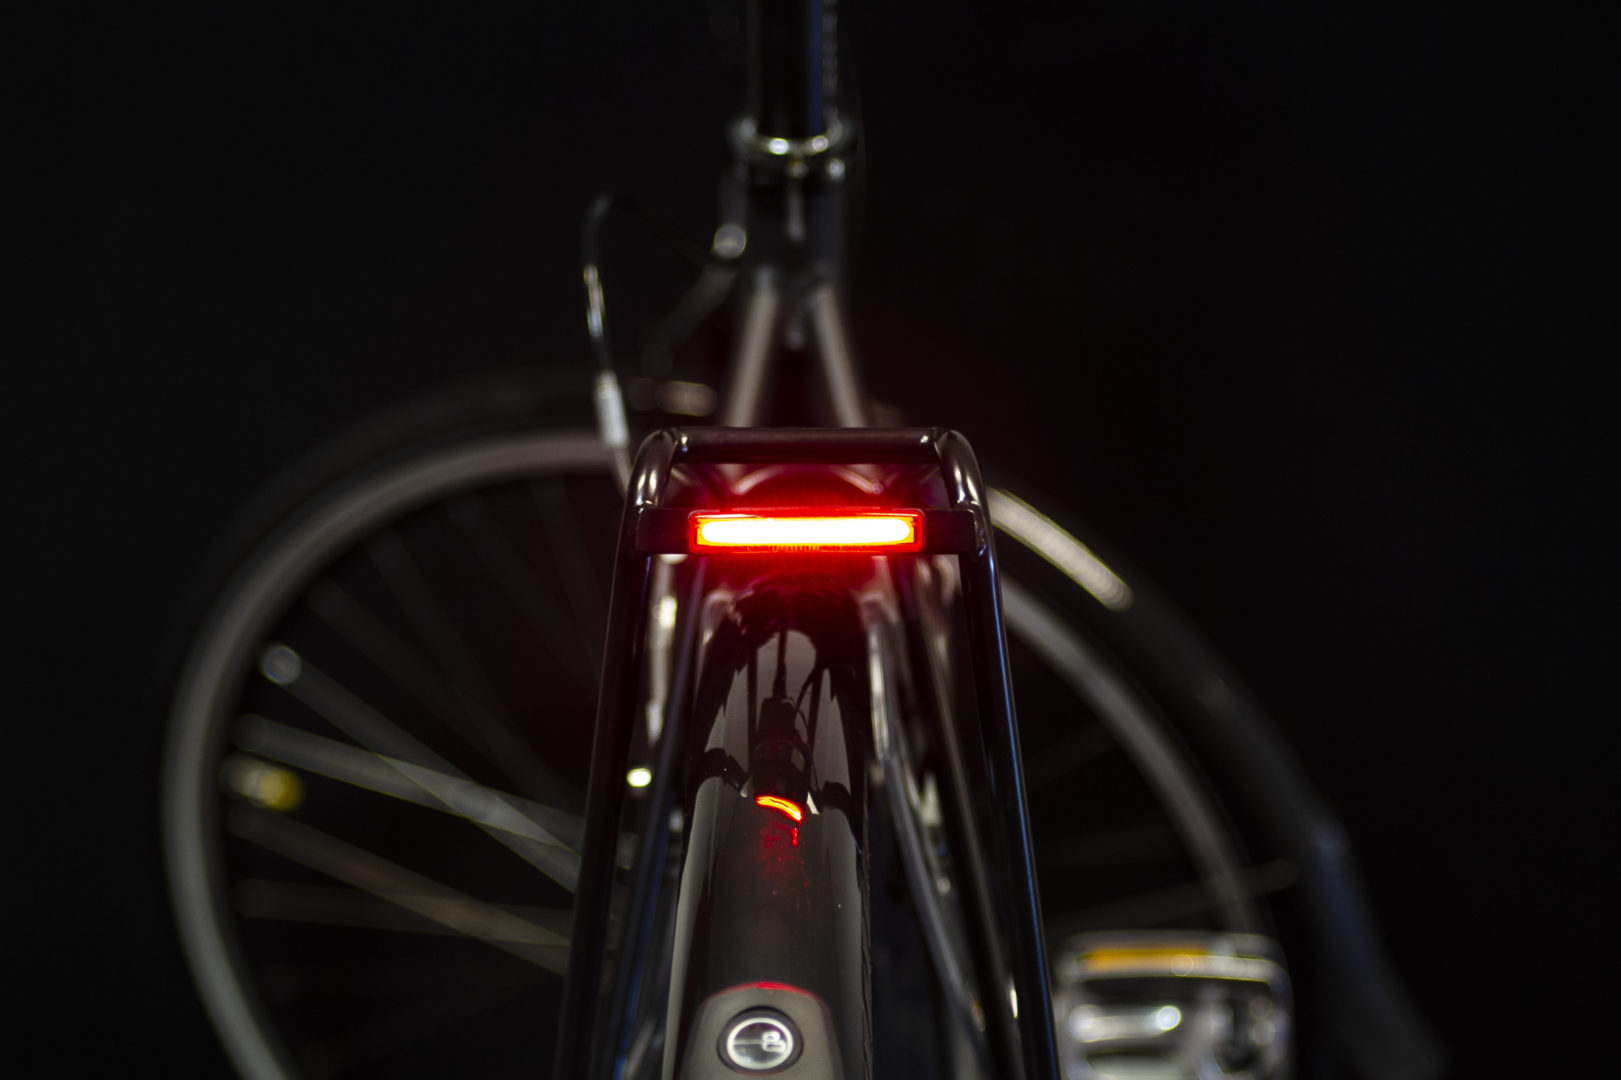 Pimento rearlight for e-bike on carrier with light on